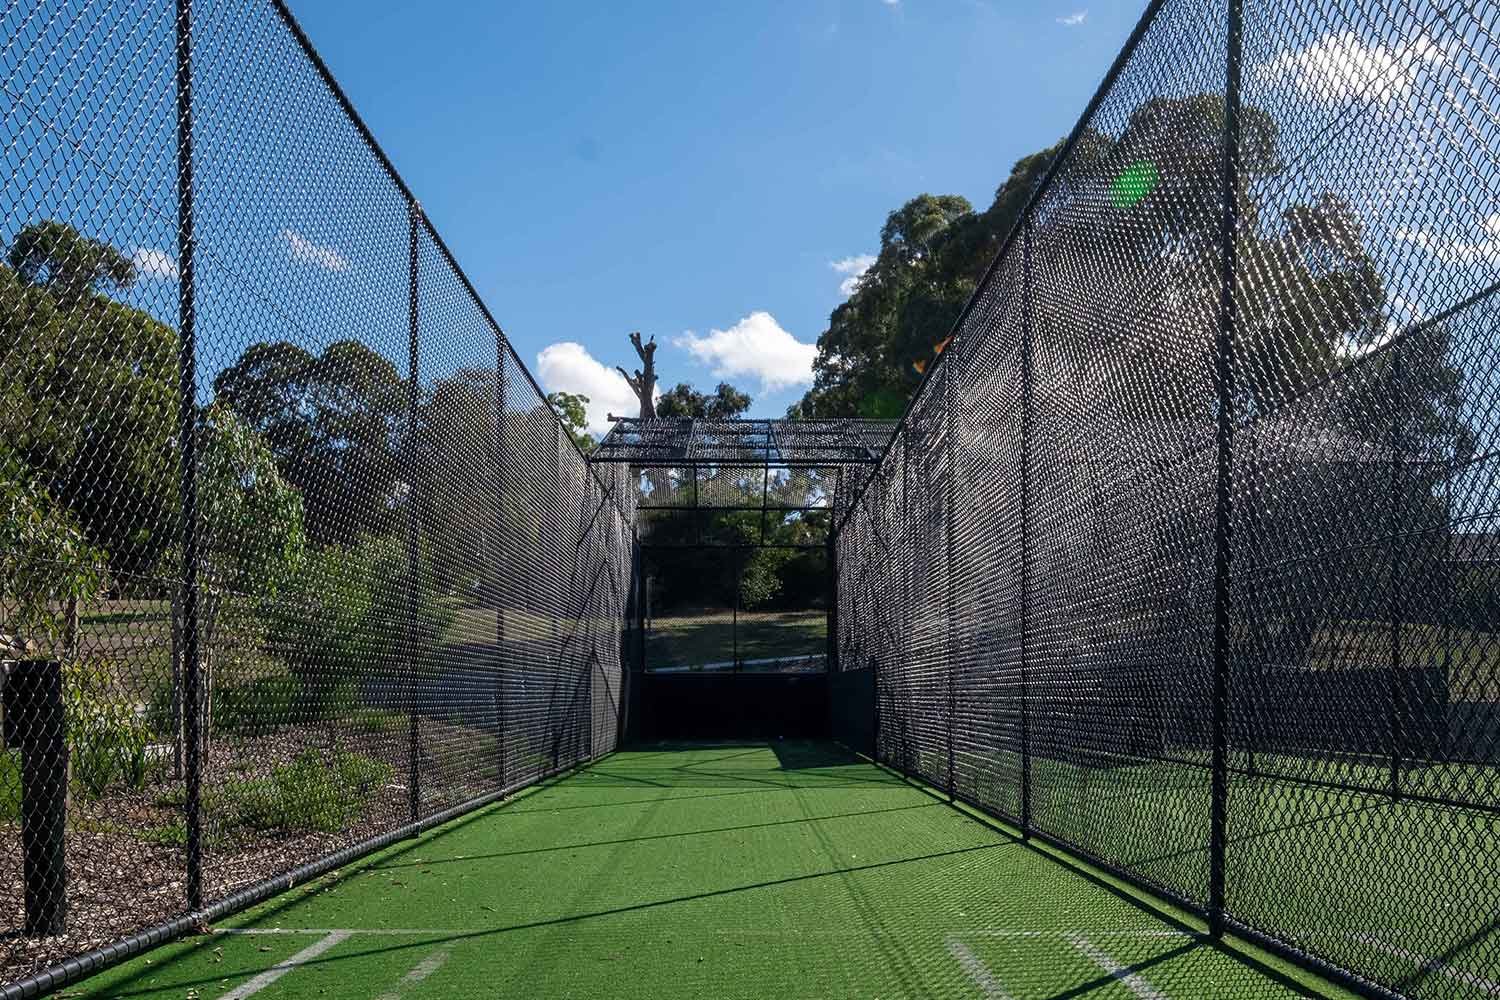 Cricket enclosures with synthetic grass